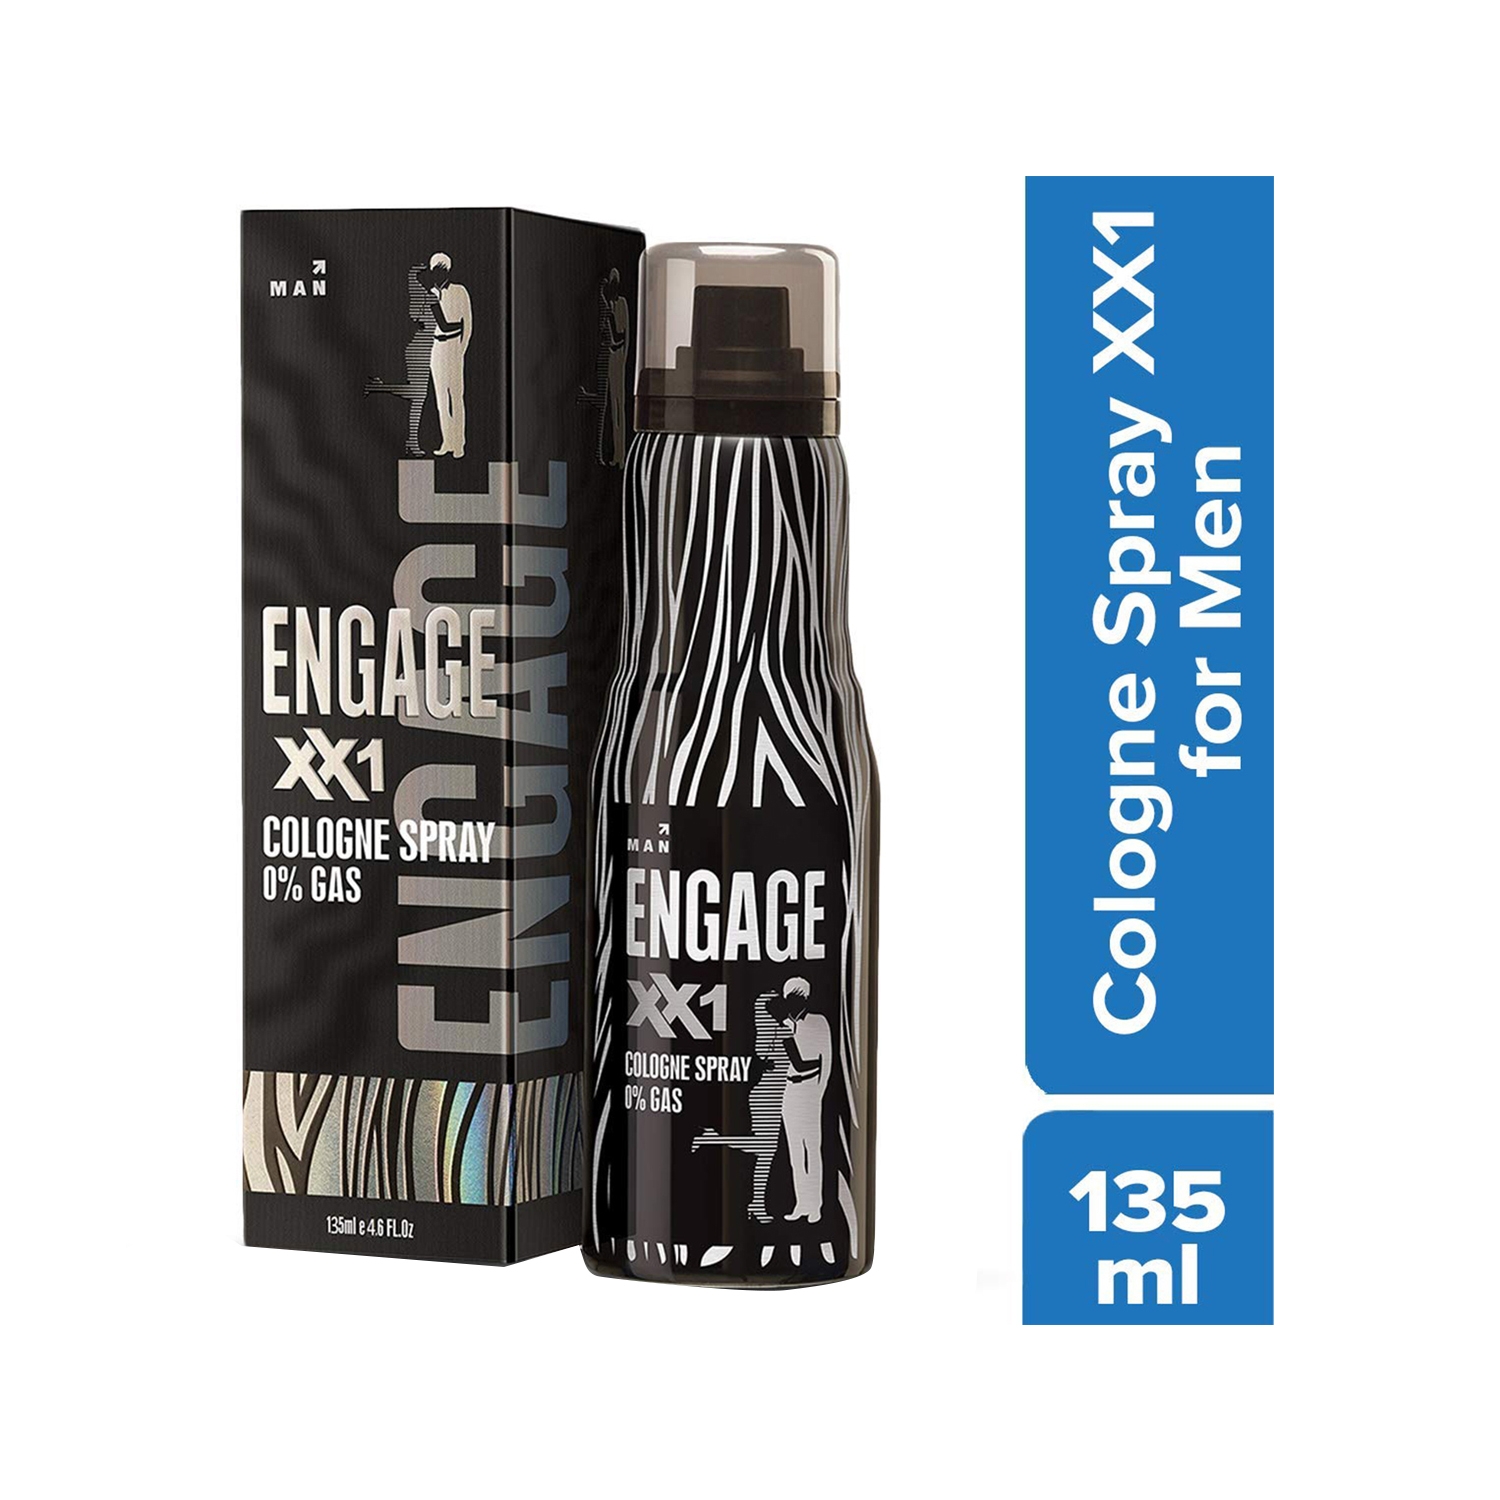 Engage | Engage XX1 Cologne Spray For Man (135ml)